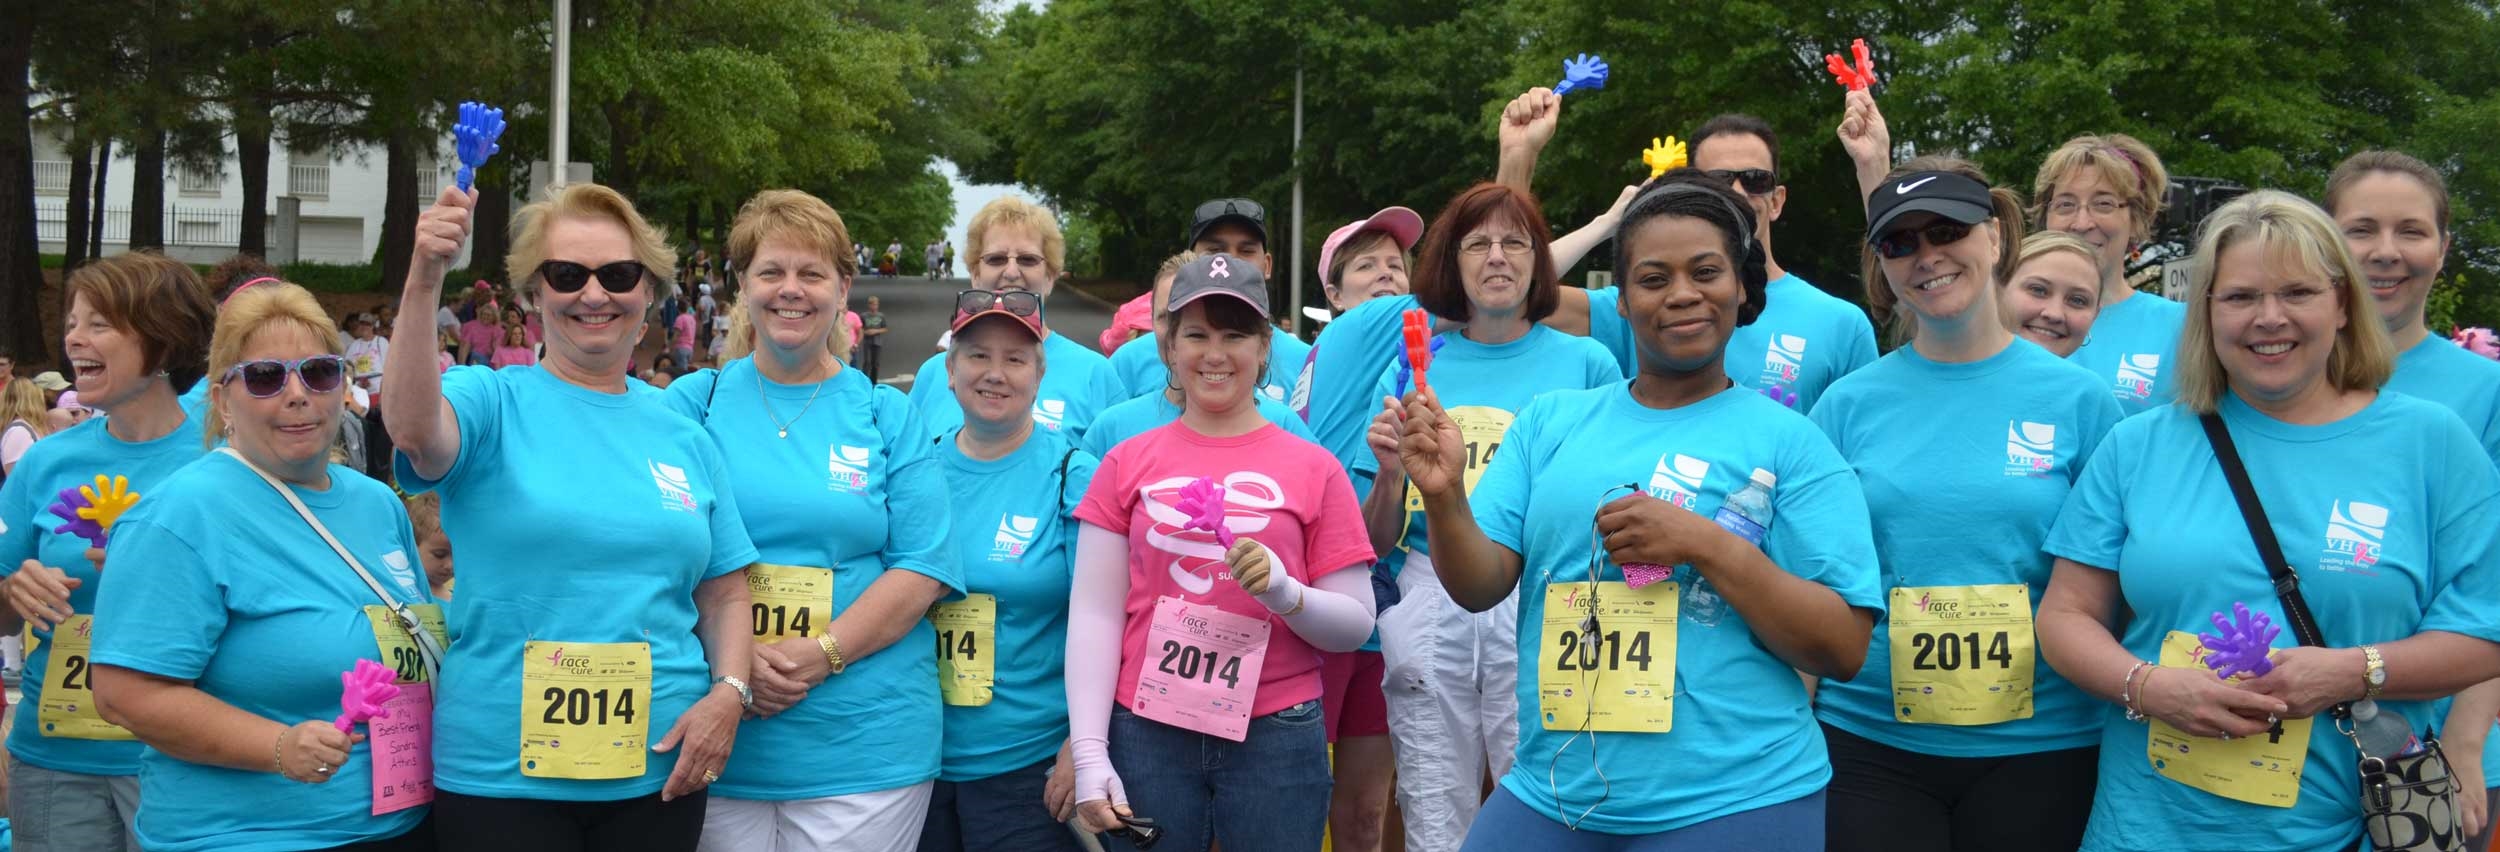 Every May, VHQC supports the Komen Race for the Cure, held in Richmond.